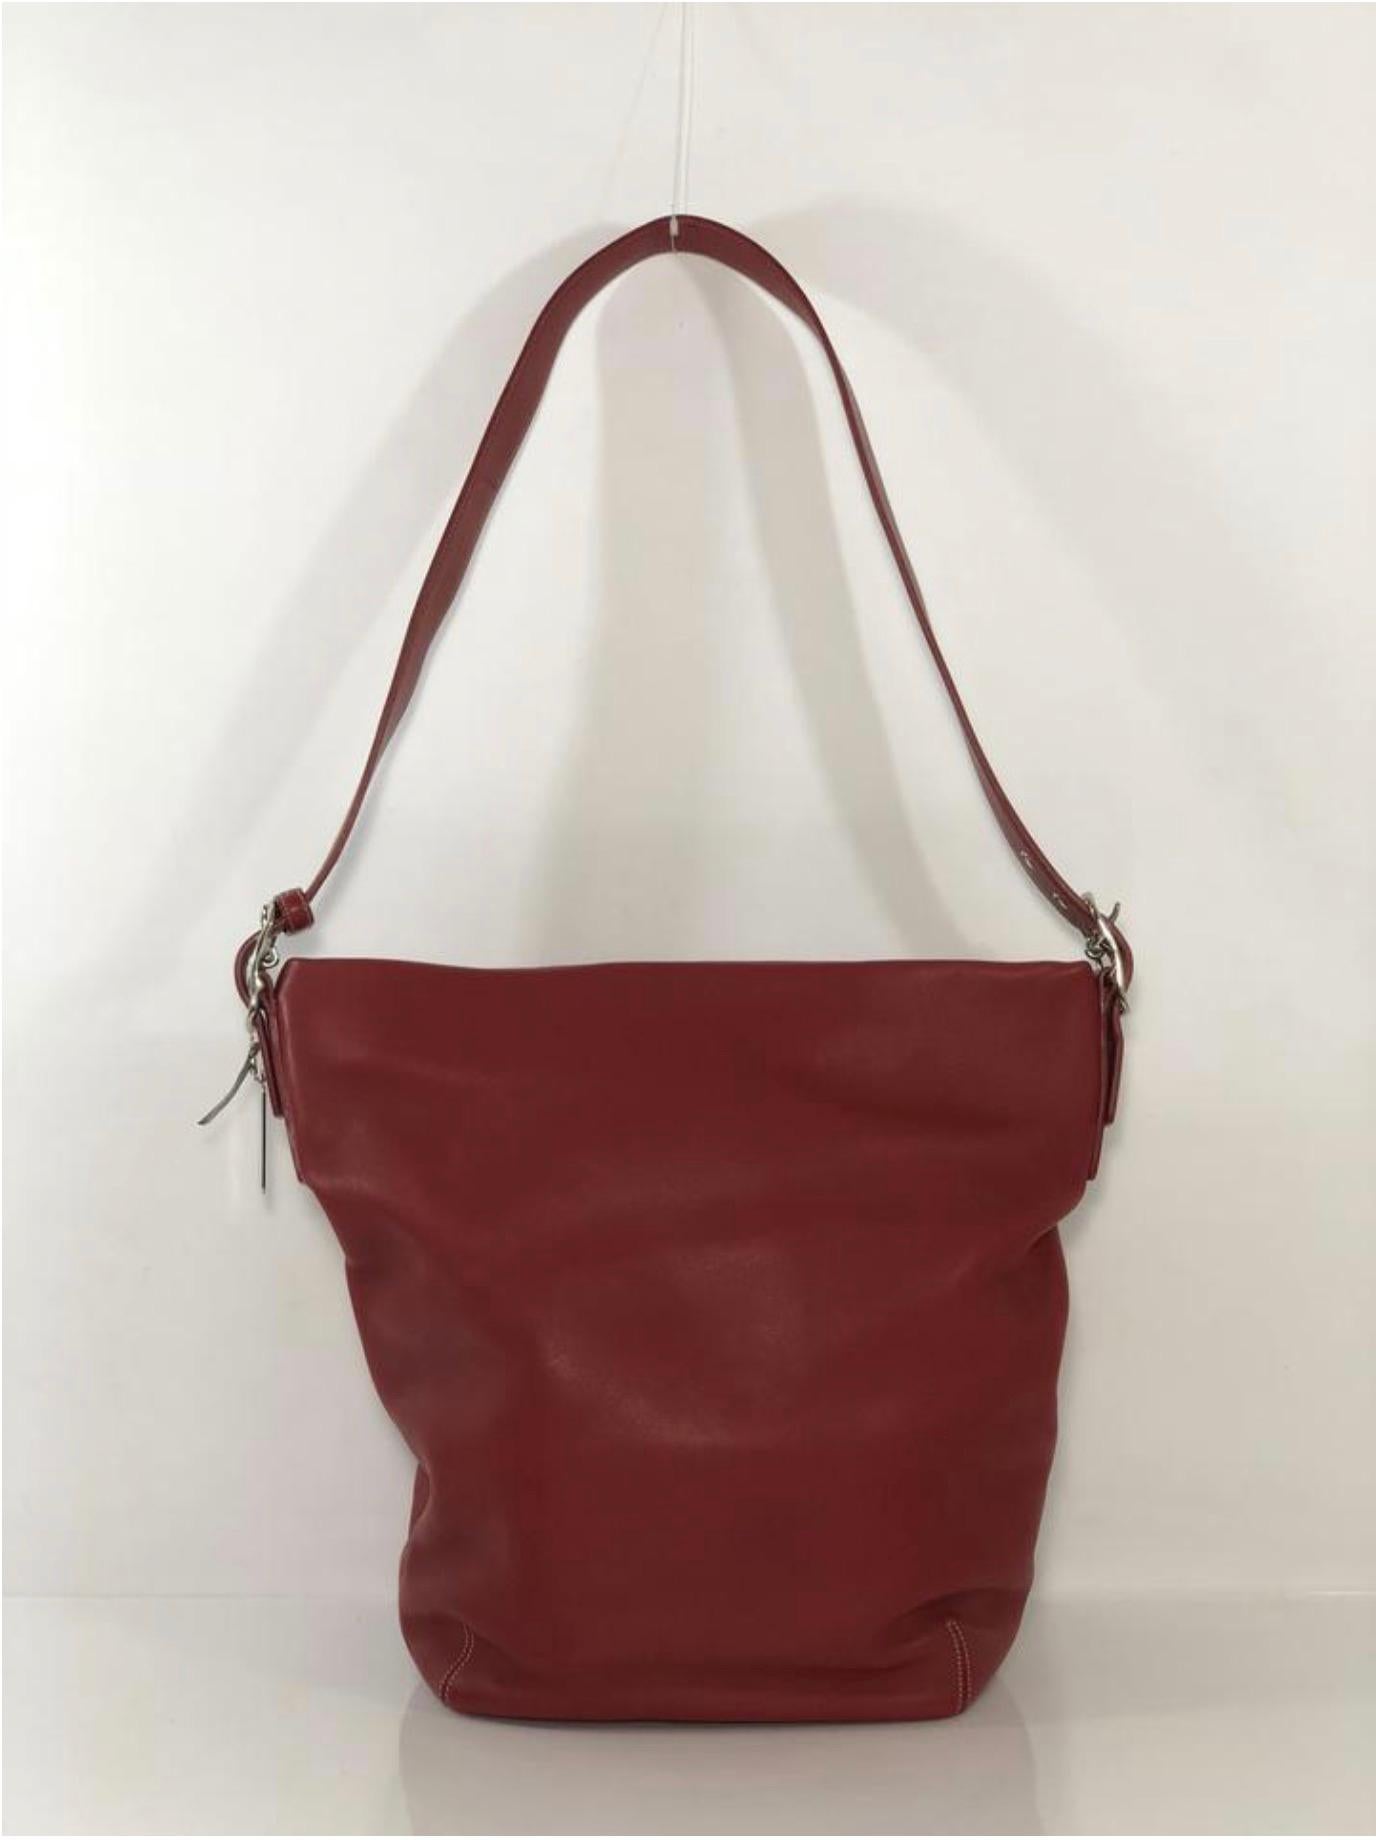 Coach Vintage Smooth Leather Extra Large Legacy Shoulder Tote Hand Bag in Deep R In New Condition For Sale In Saint Charles, IL